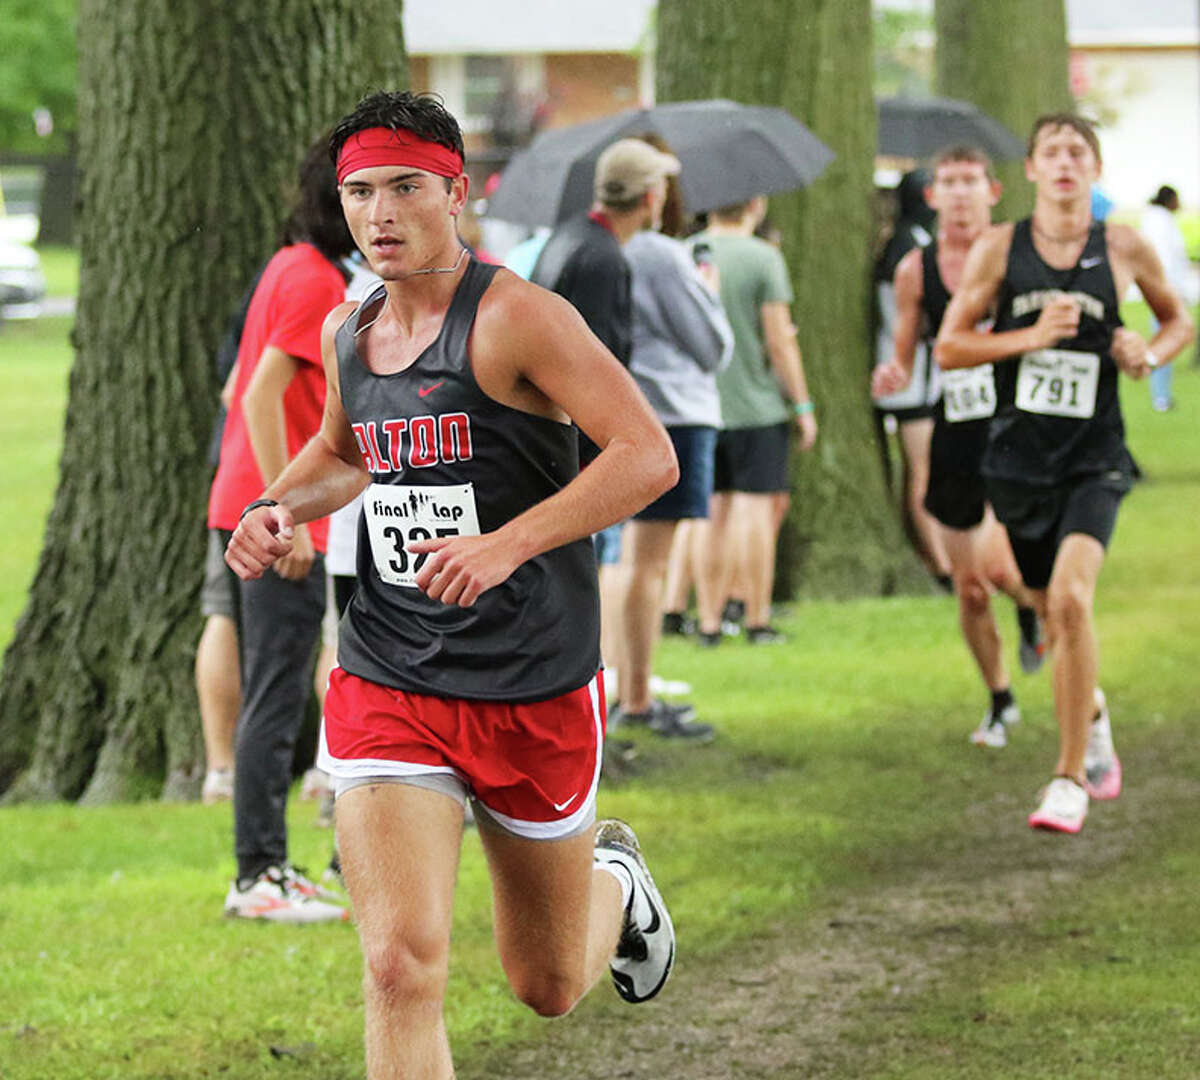 Alton senior Simon McClaine (left) runs during the Granite City Invite on Sept. 3. On Saturday at the Belleville West Invitational, McClaine ran ninth to help the Redbirds to a third-place finish.